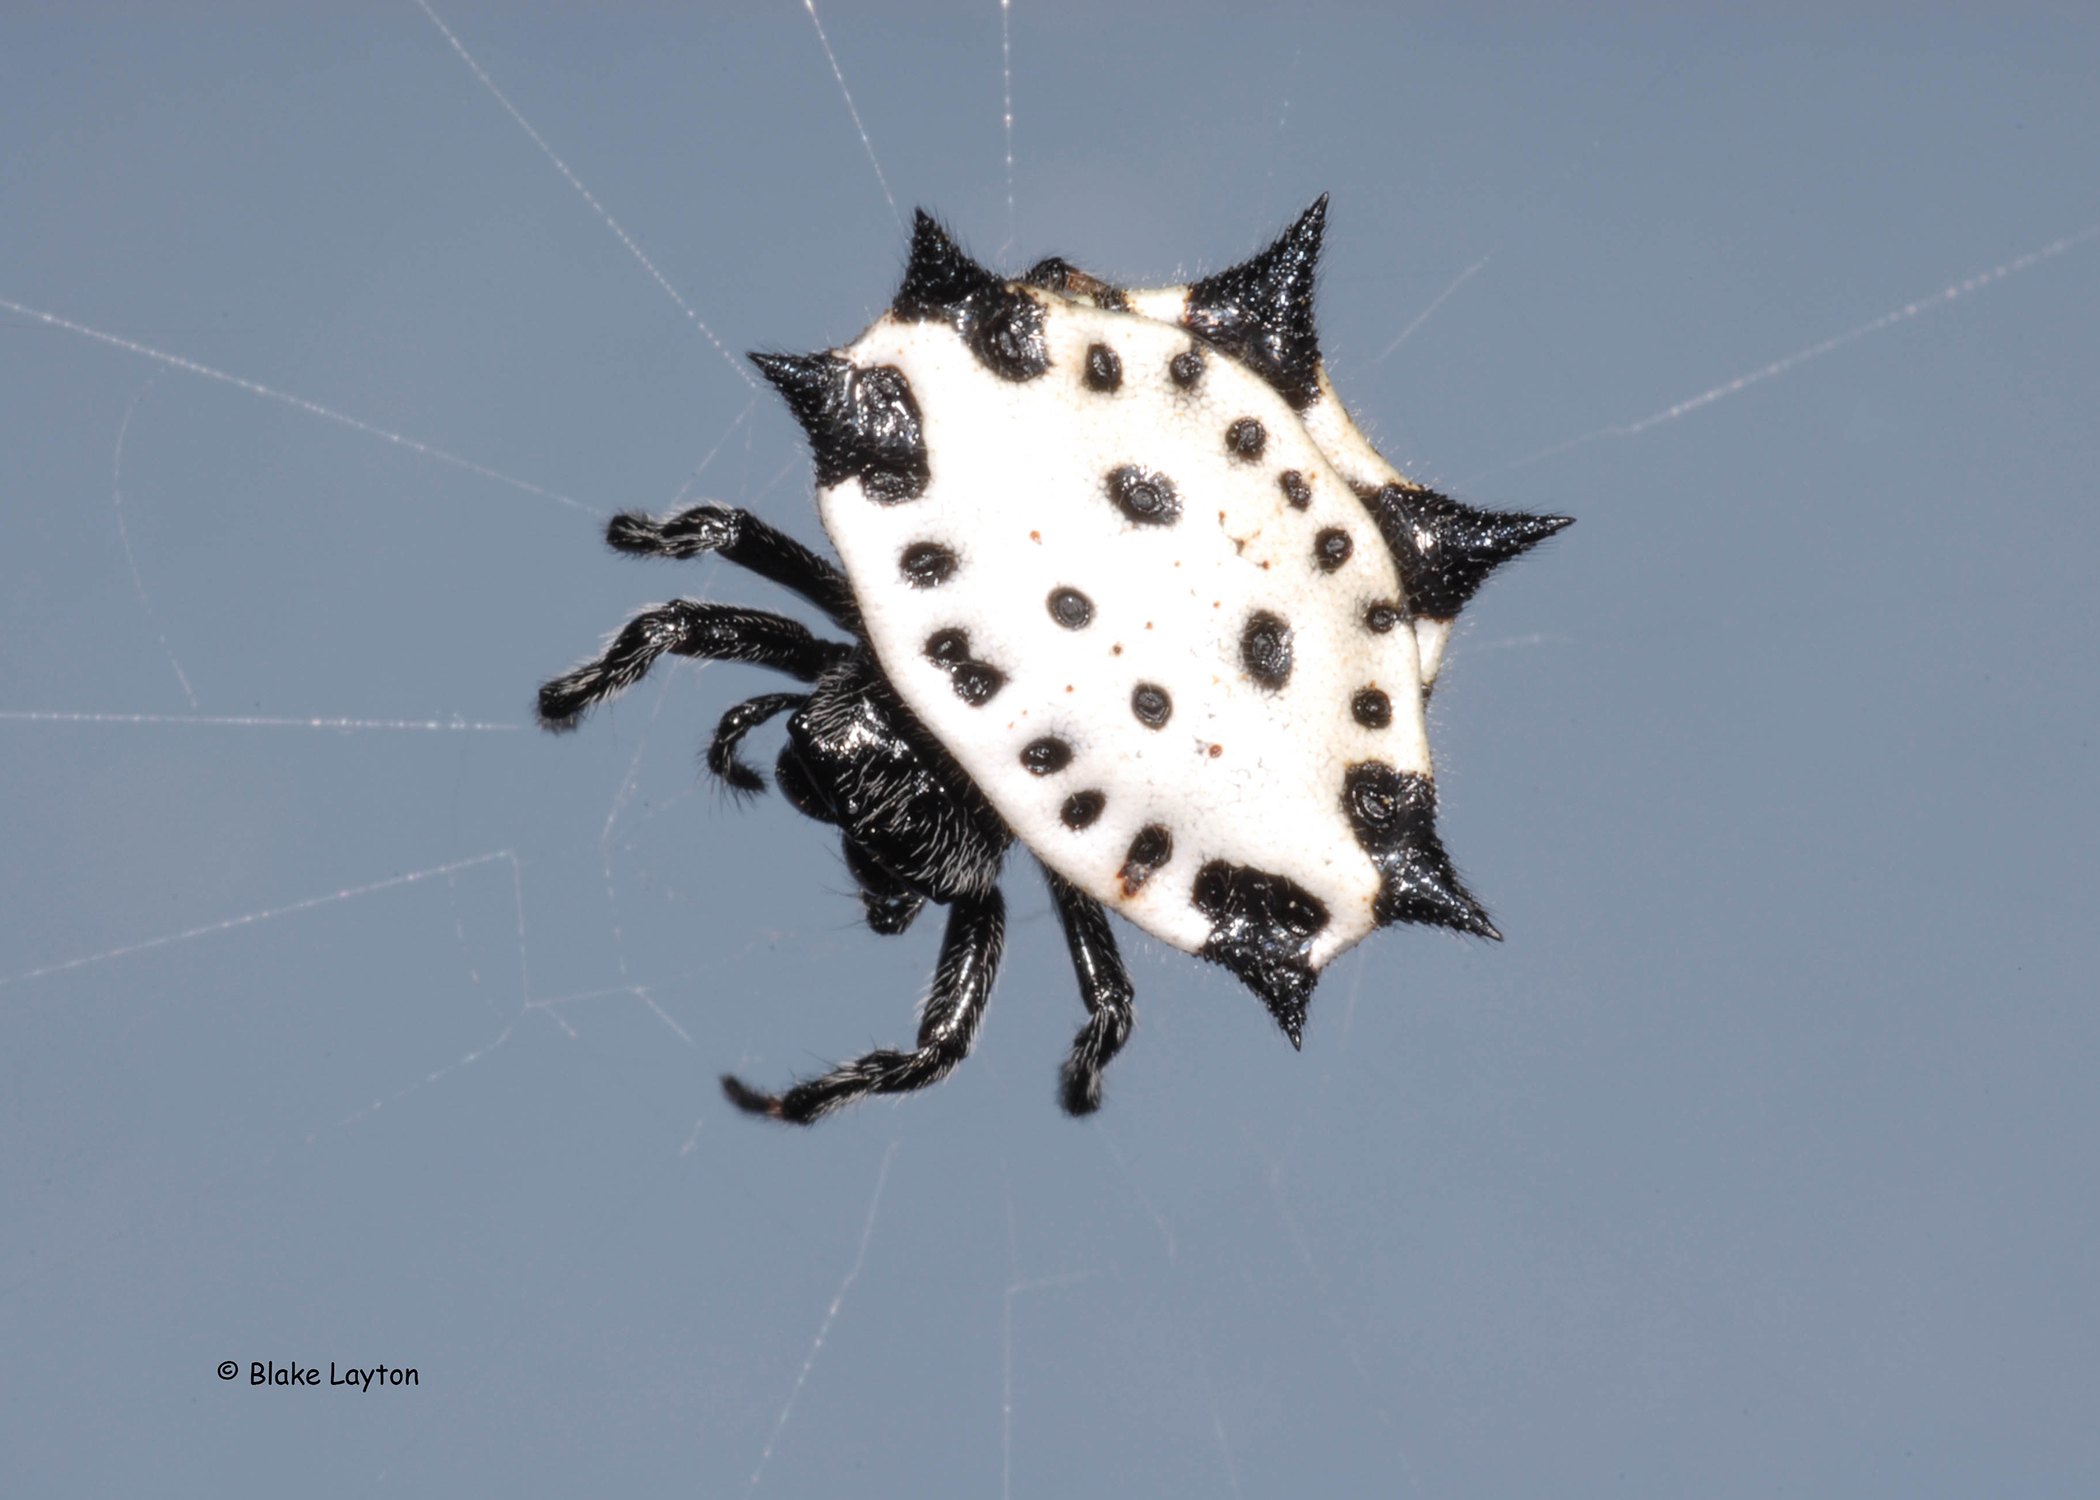 A female black spider with a white, spiny, spiked shell in an orbital web.